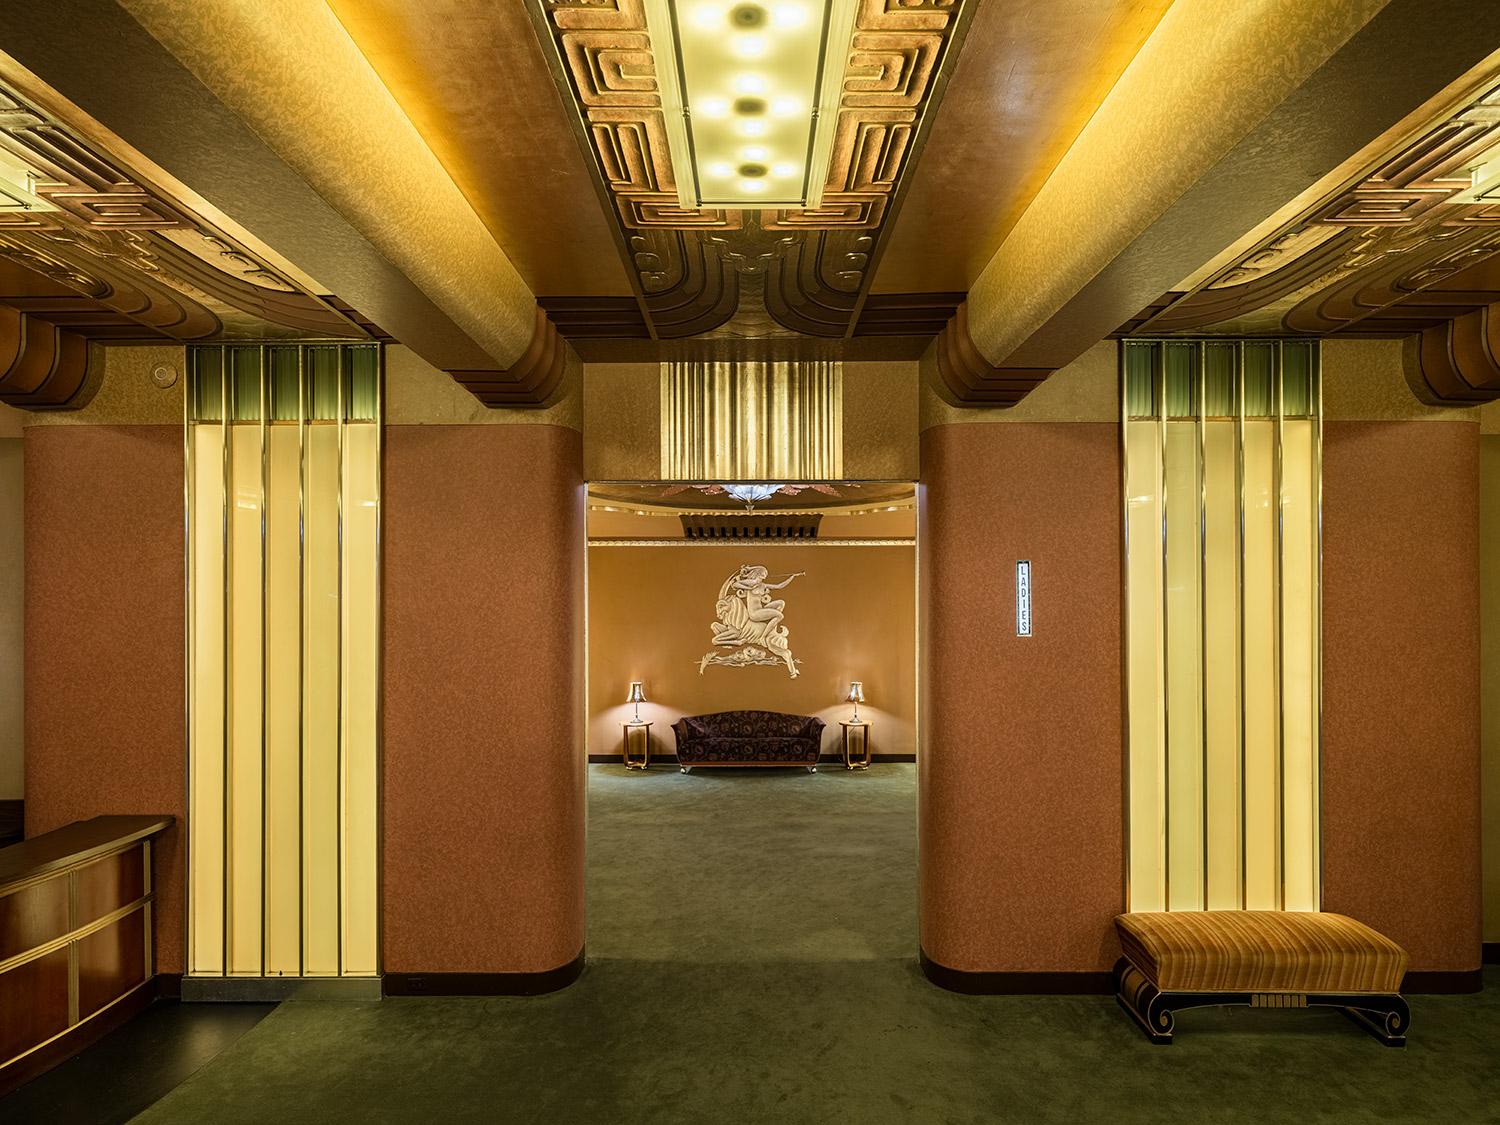 The ladies lounge of the Paramount Theatre in Oakland was designed by consummate San Francisco-based architect Timothy L. Pfleuger. An exquisite space seemingly out of the past and future simultaneously. Futurist machine-age elements of energy and